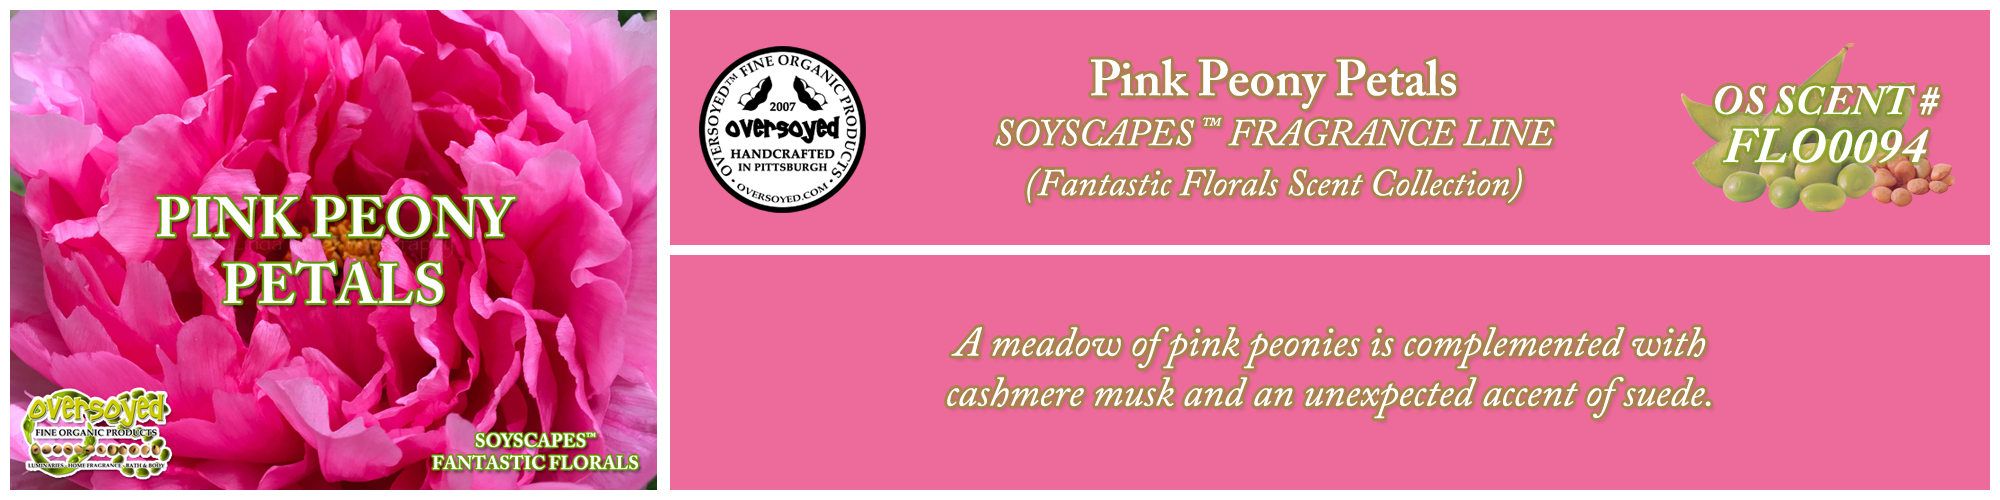 Pink Peony Petals Handcrafted Products Collection